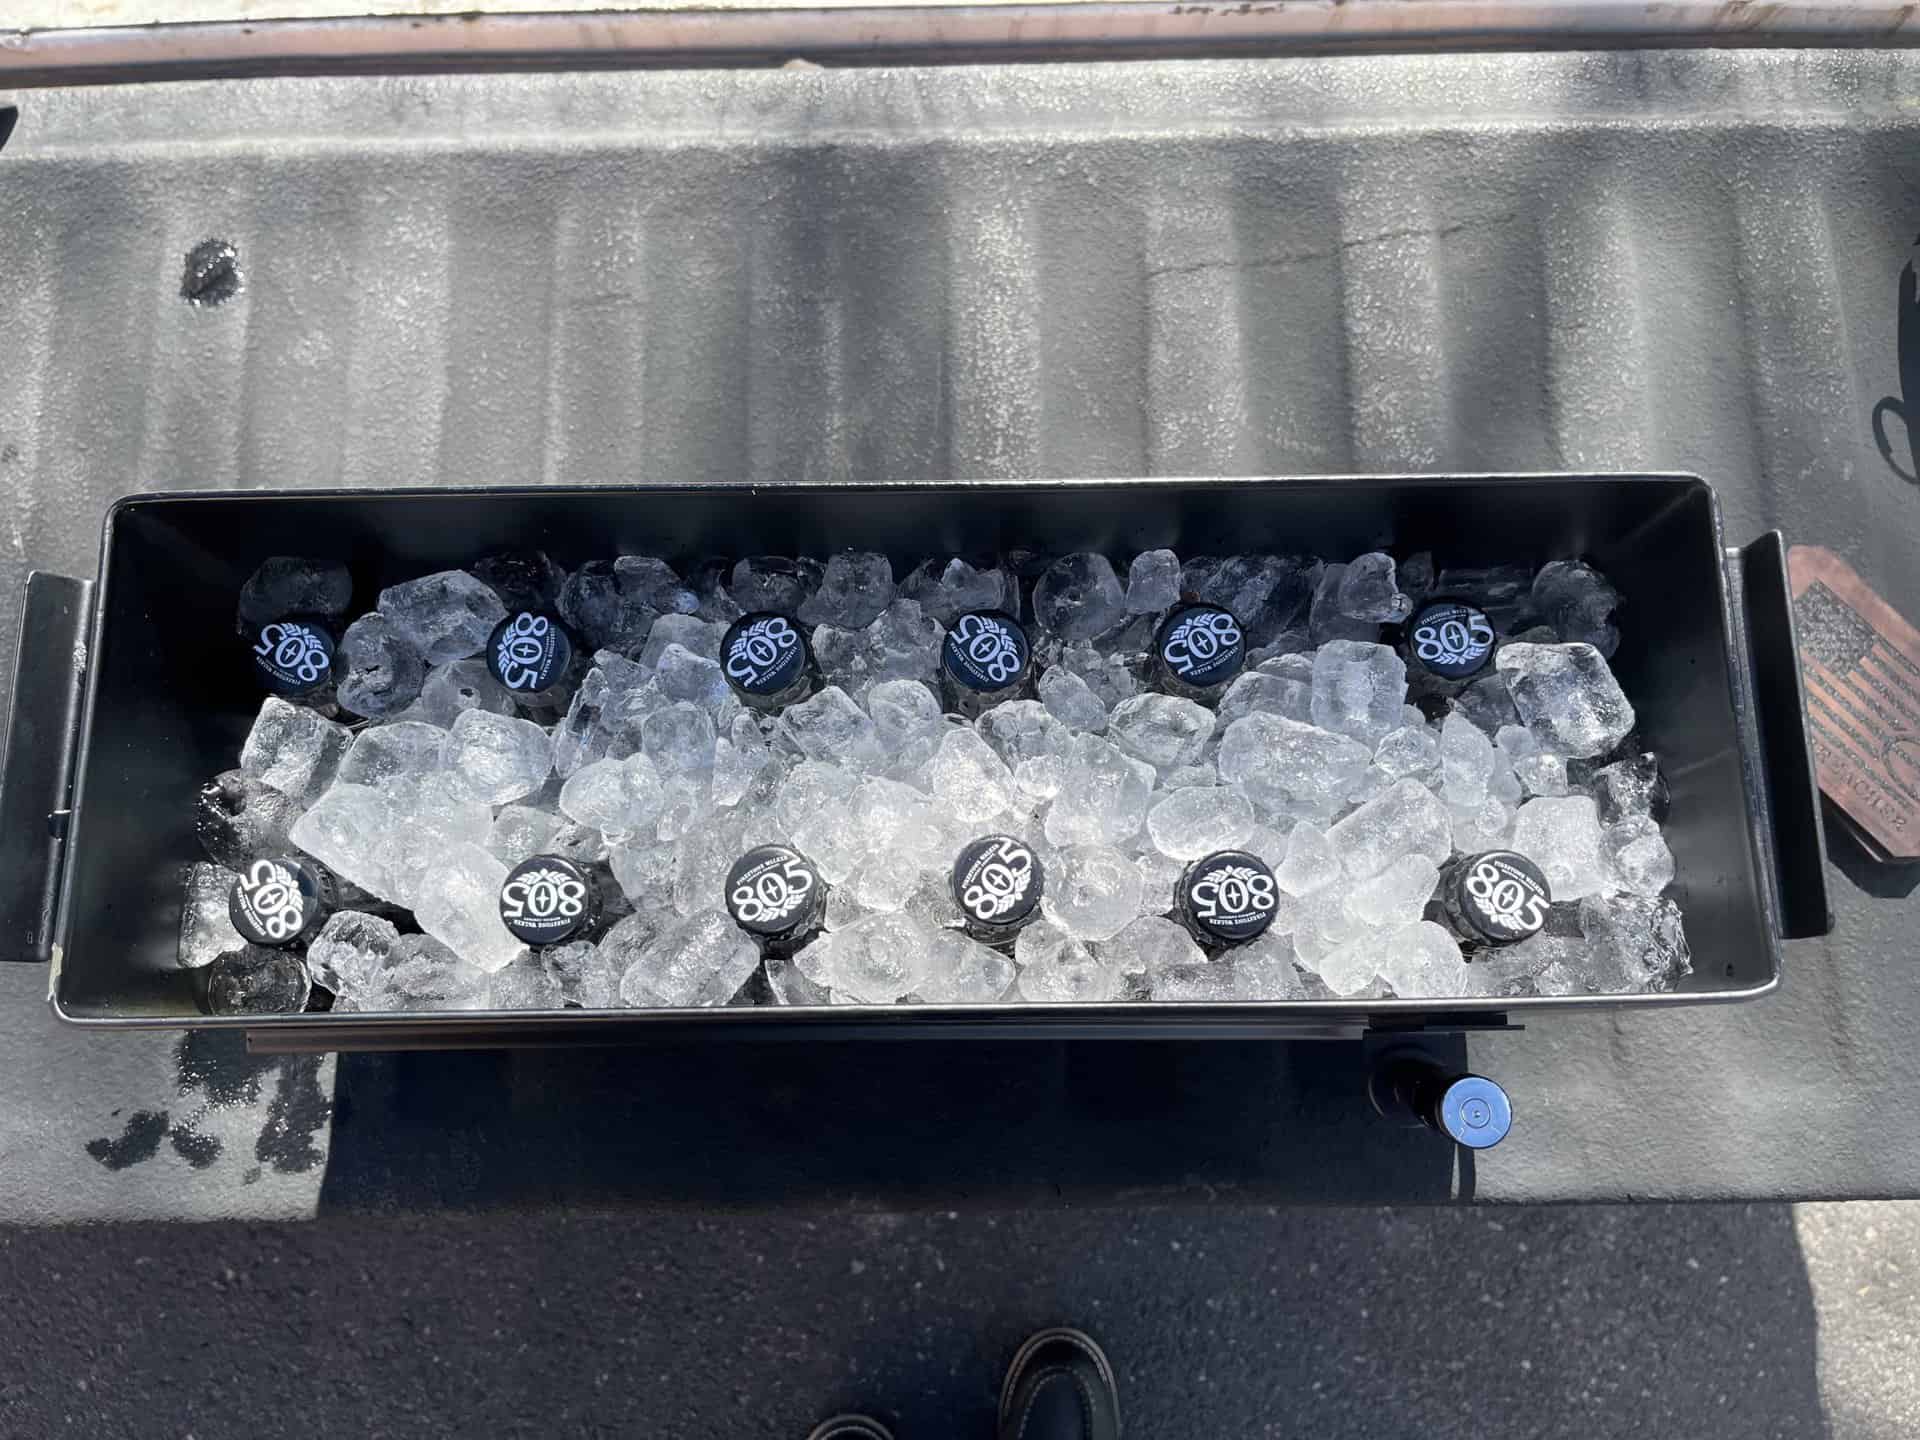 combat cooler by bottle breacher opened with cold bottles and ice